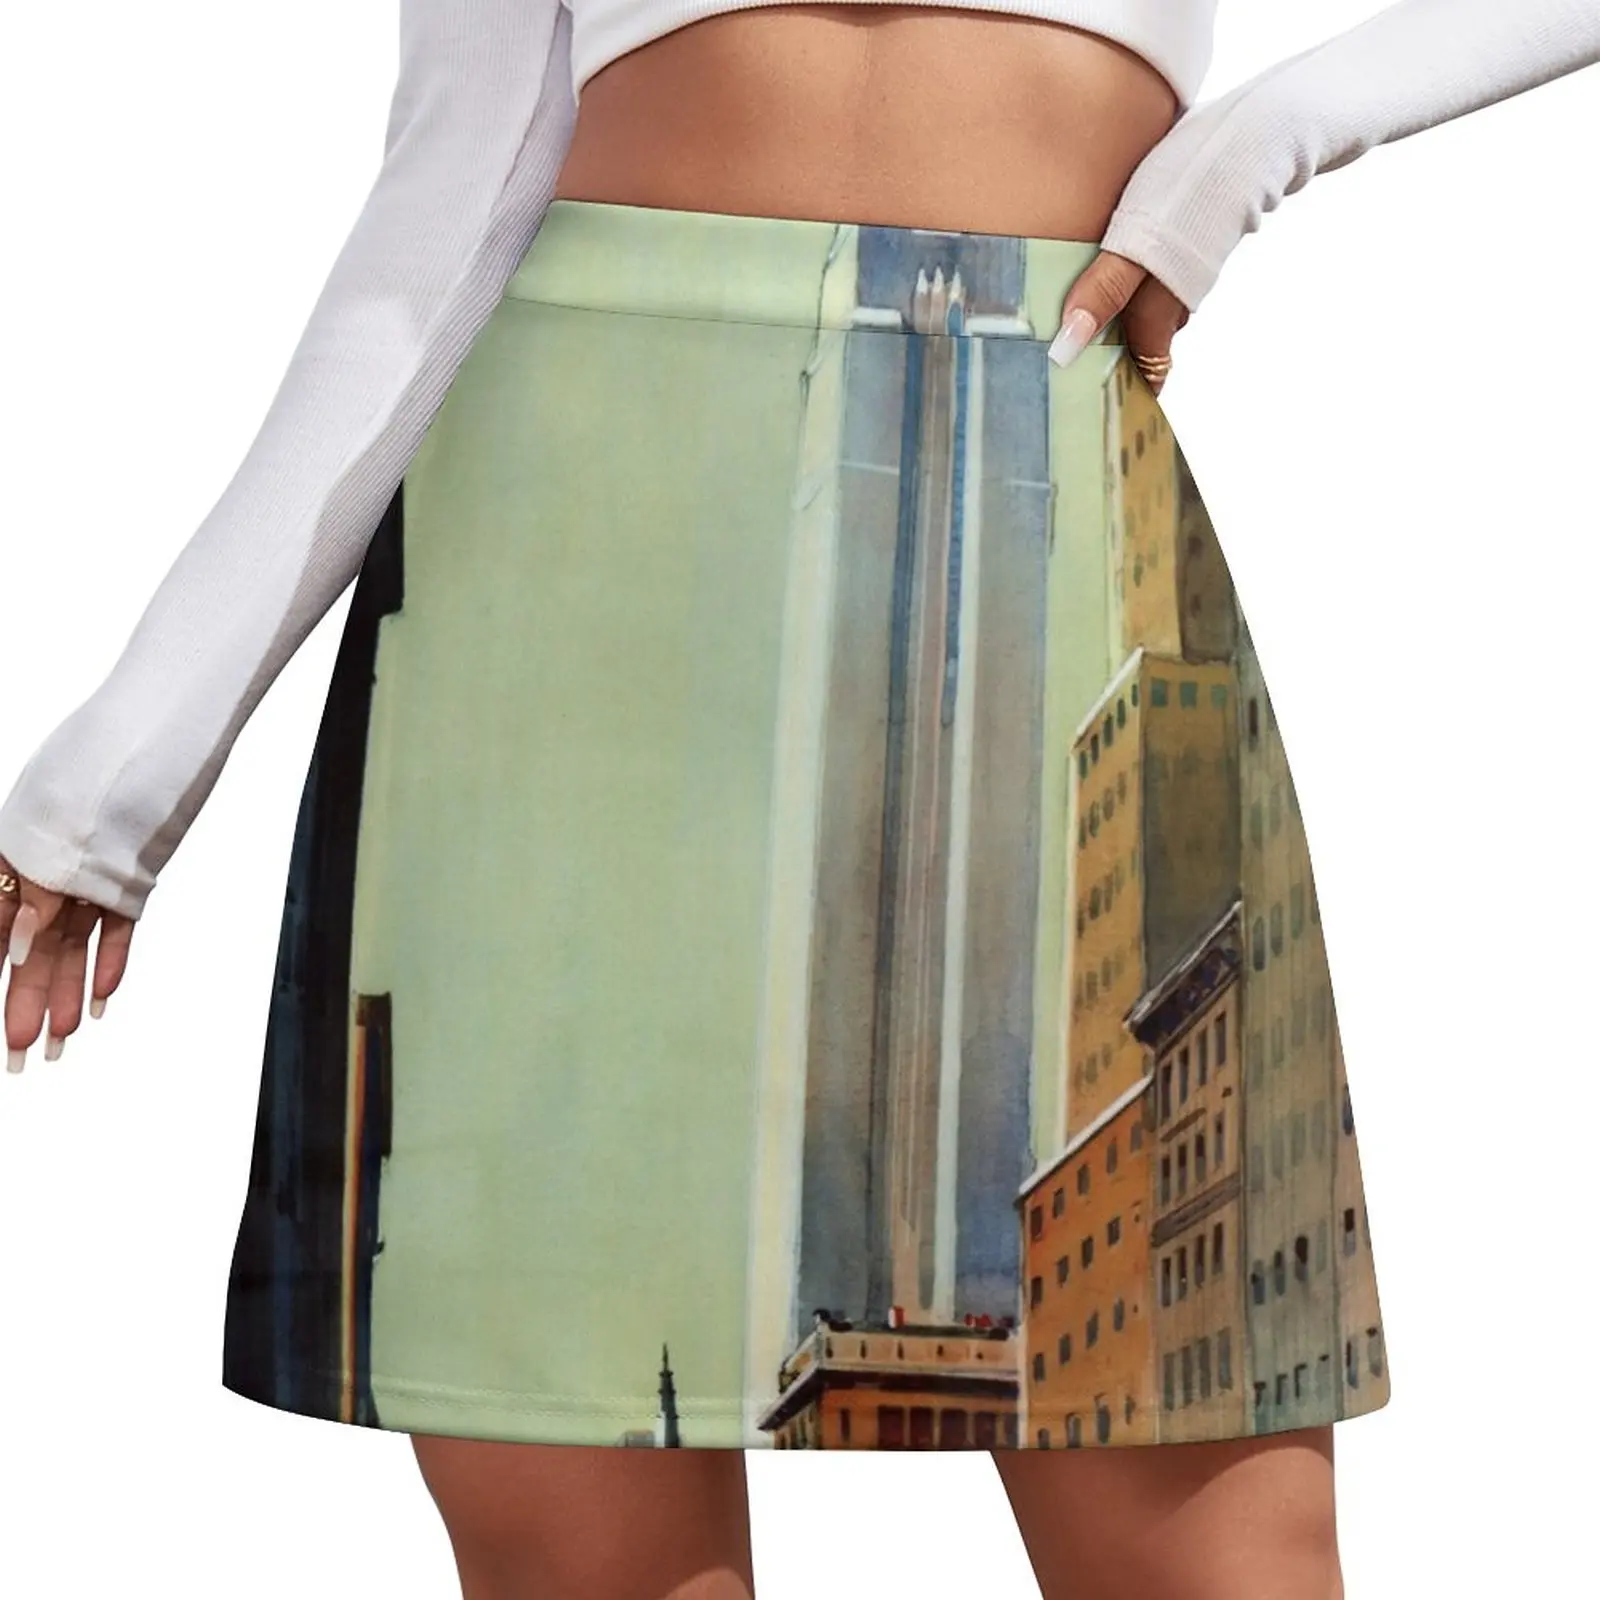 

Fifth Avenue New York Vintage Travel Poster Mini Skirt skirt skirt short skirt mini skirt for women Women's skirts